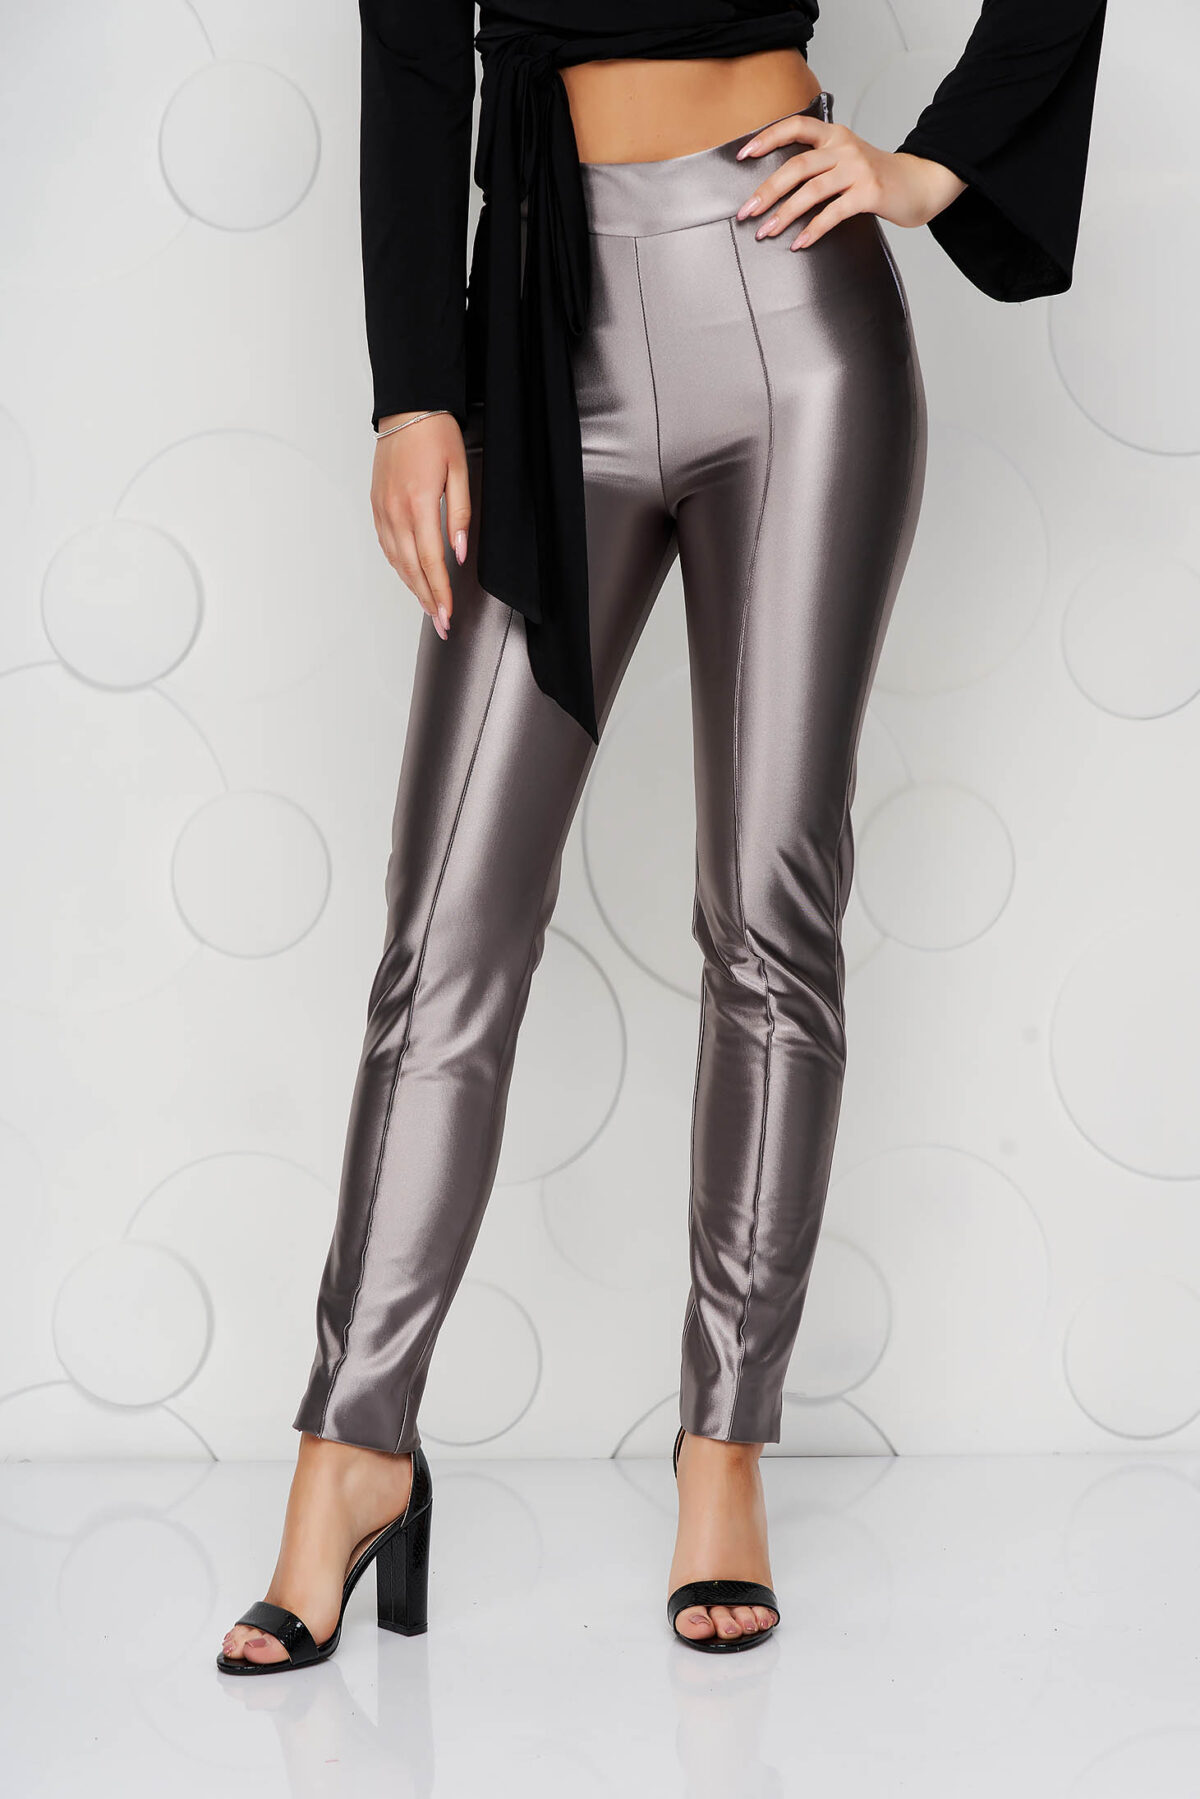 Silver Trousers Slightly Elastic Fabric Elegant Conical